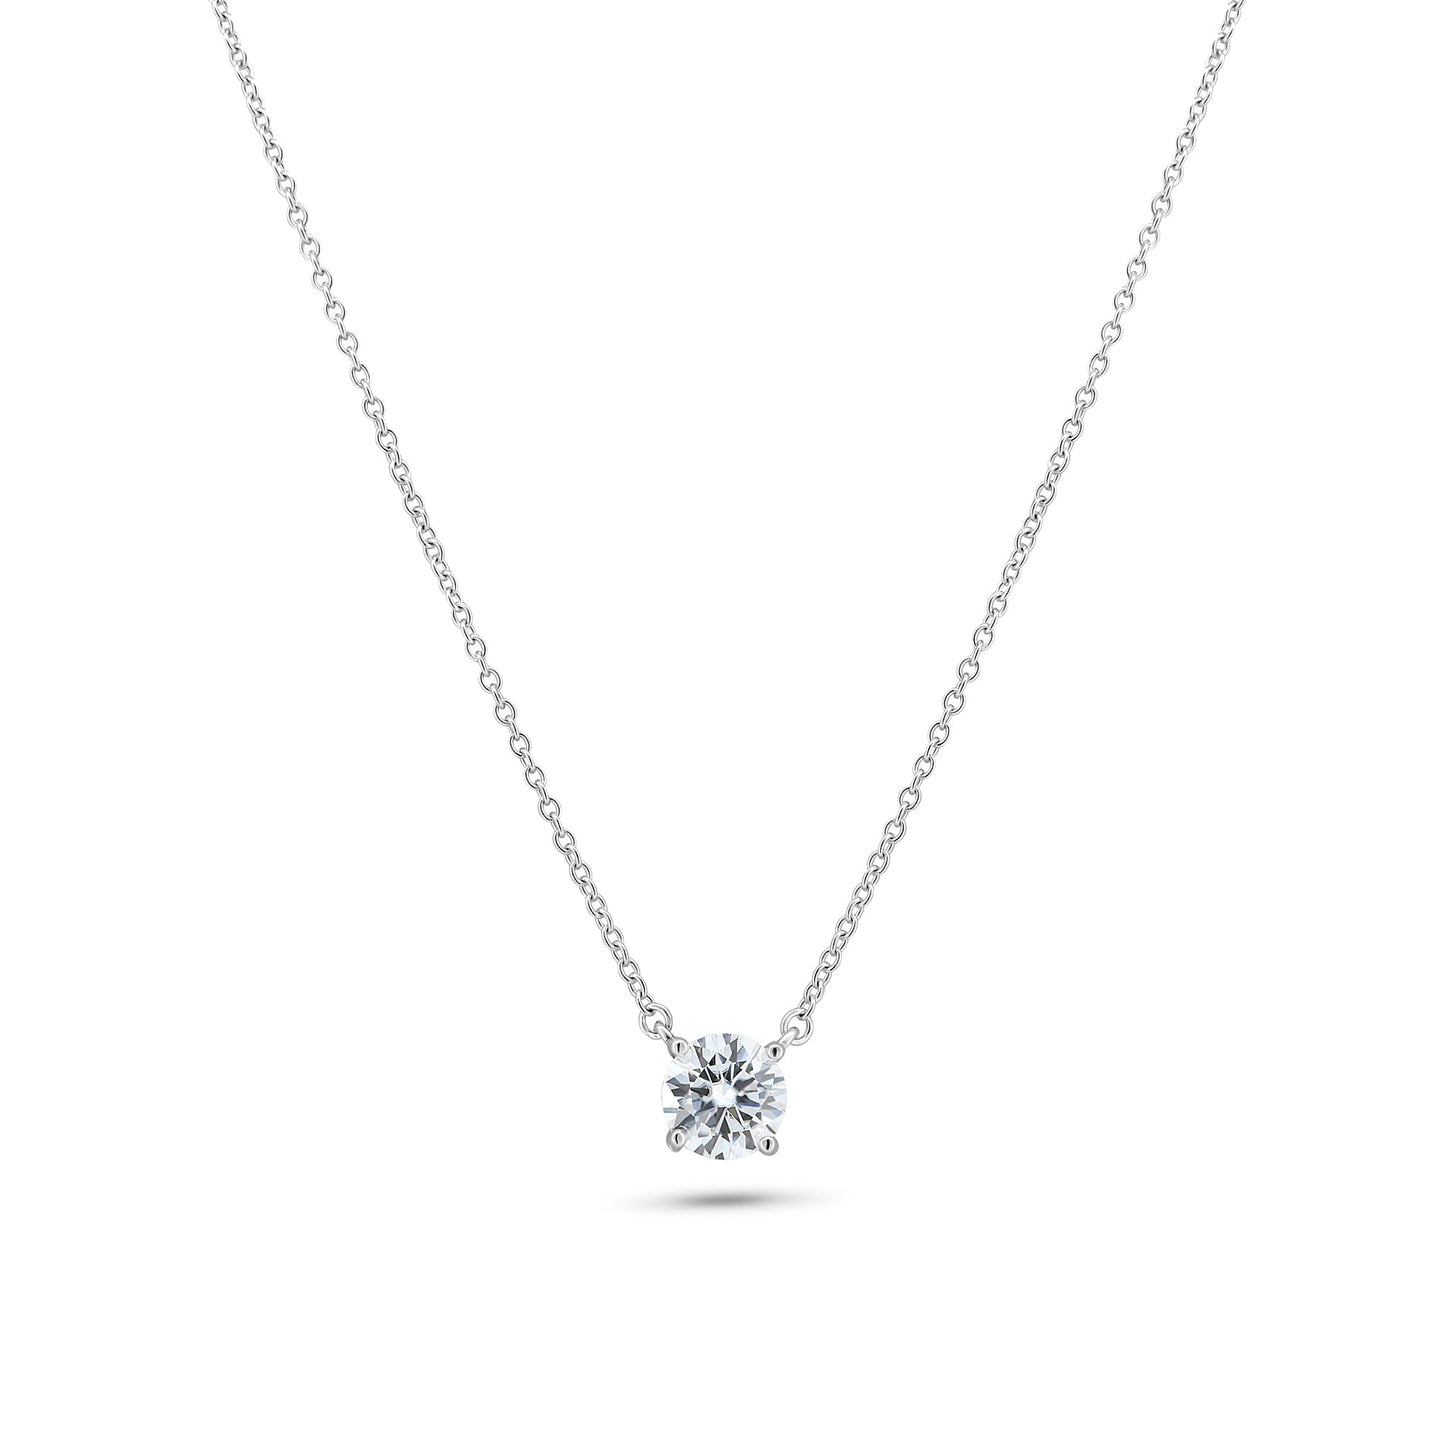 Silver 925 Rhodium Plated Moissanite Stone Halo Necklace - MGMN00011